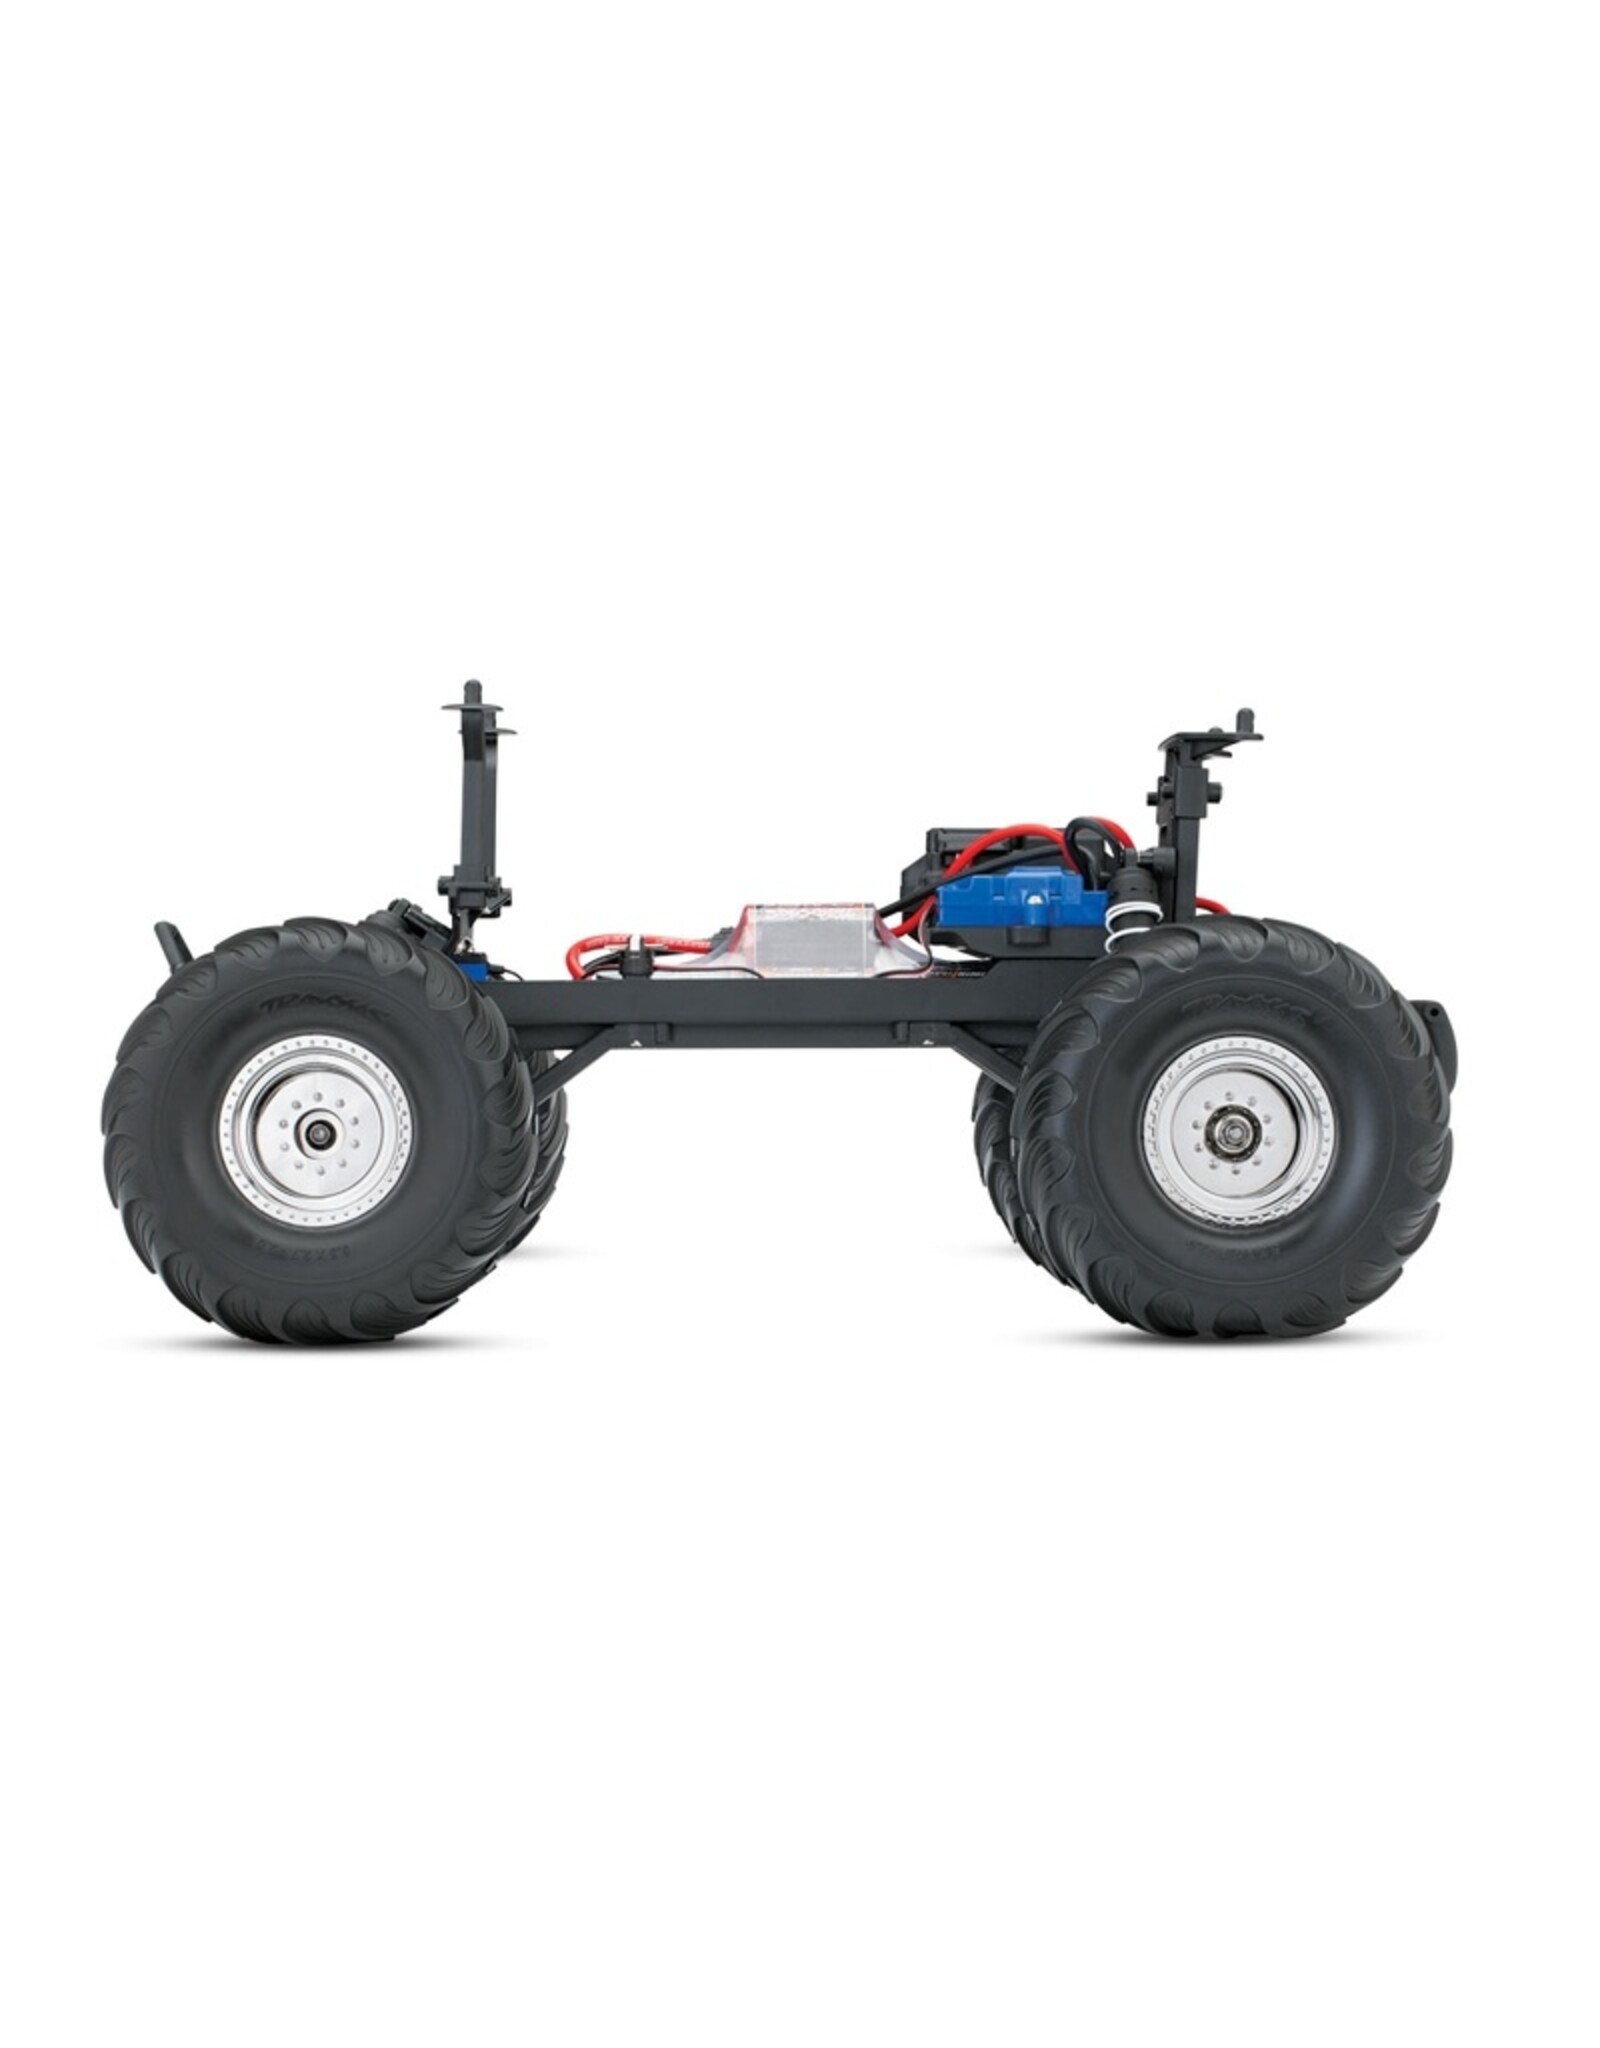 Traxxas TRA36034-8 BIGFOOT No. 1: 1/10 Scale Monster Truck w/USB-C